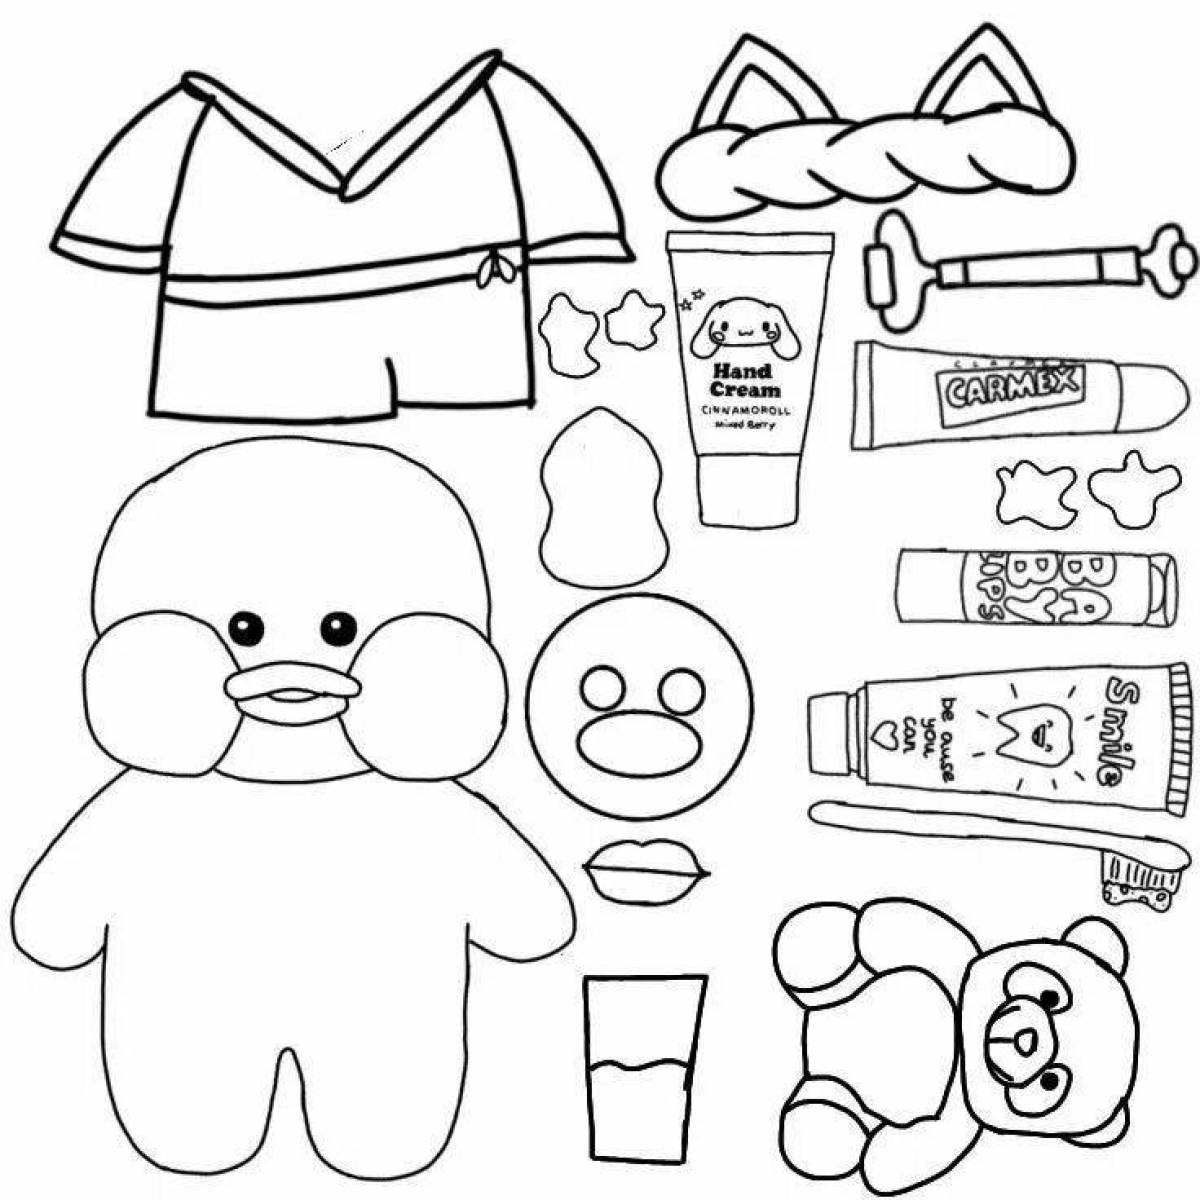 Coloured coloring book for girls lalafanfan duck with clothes